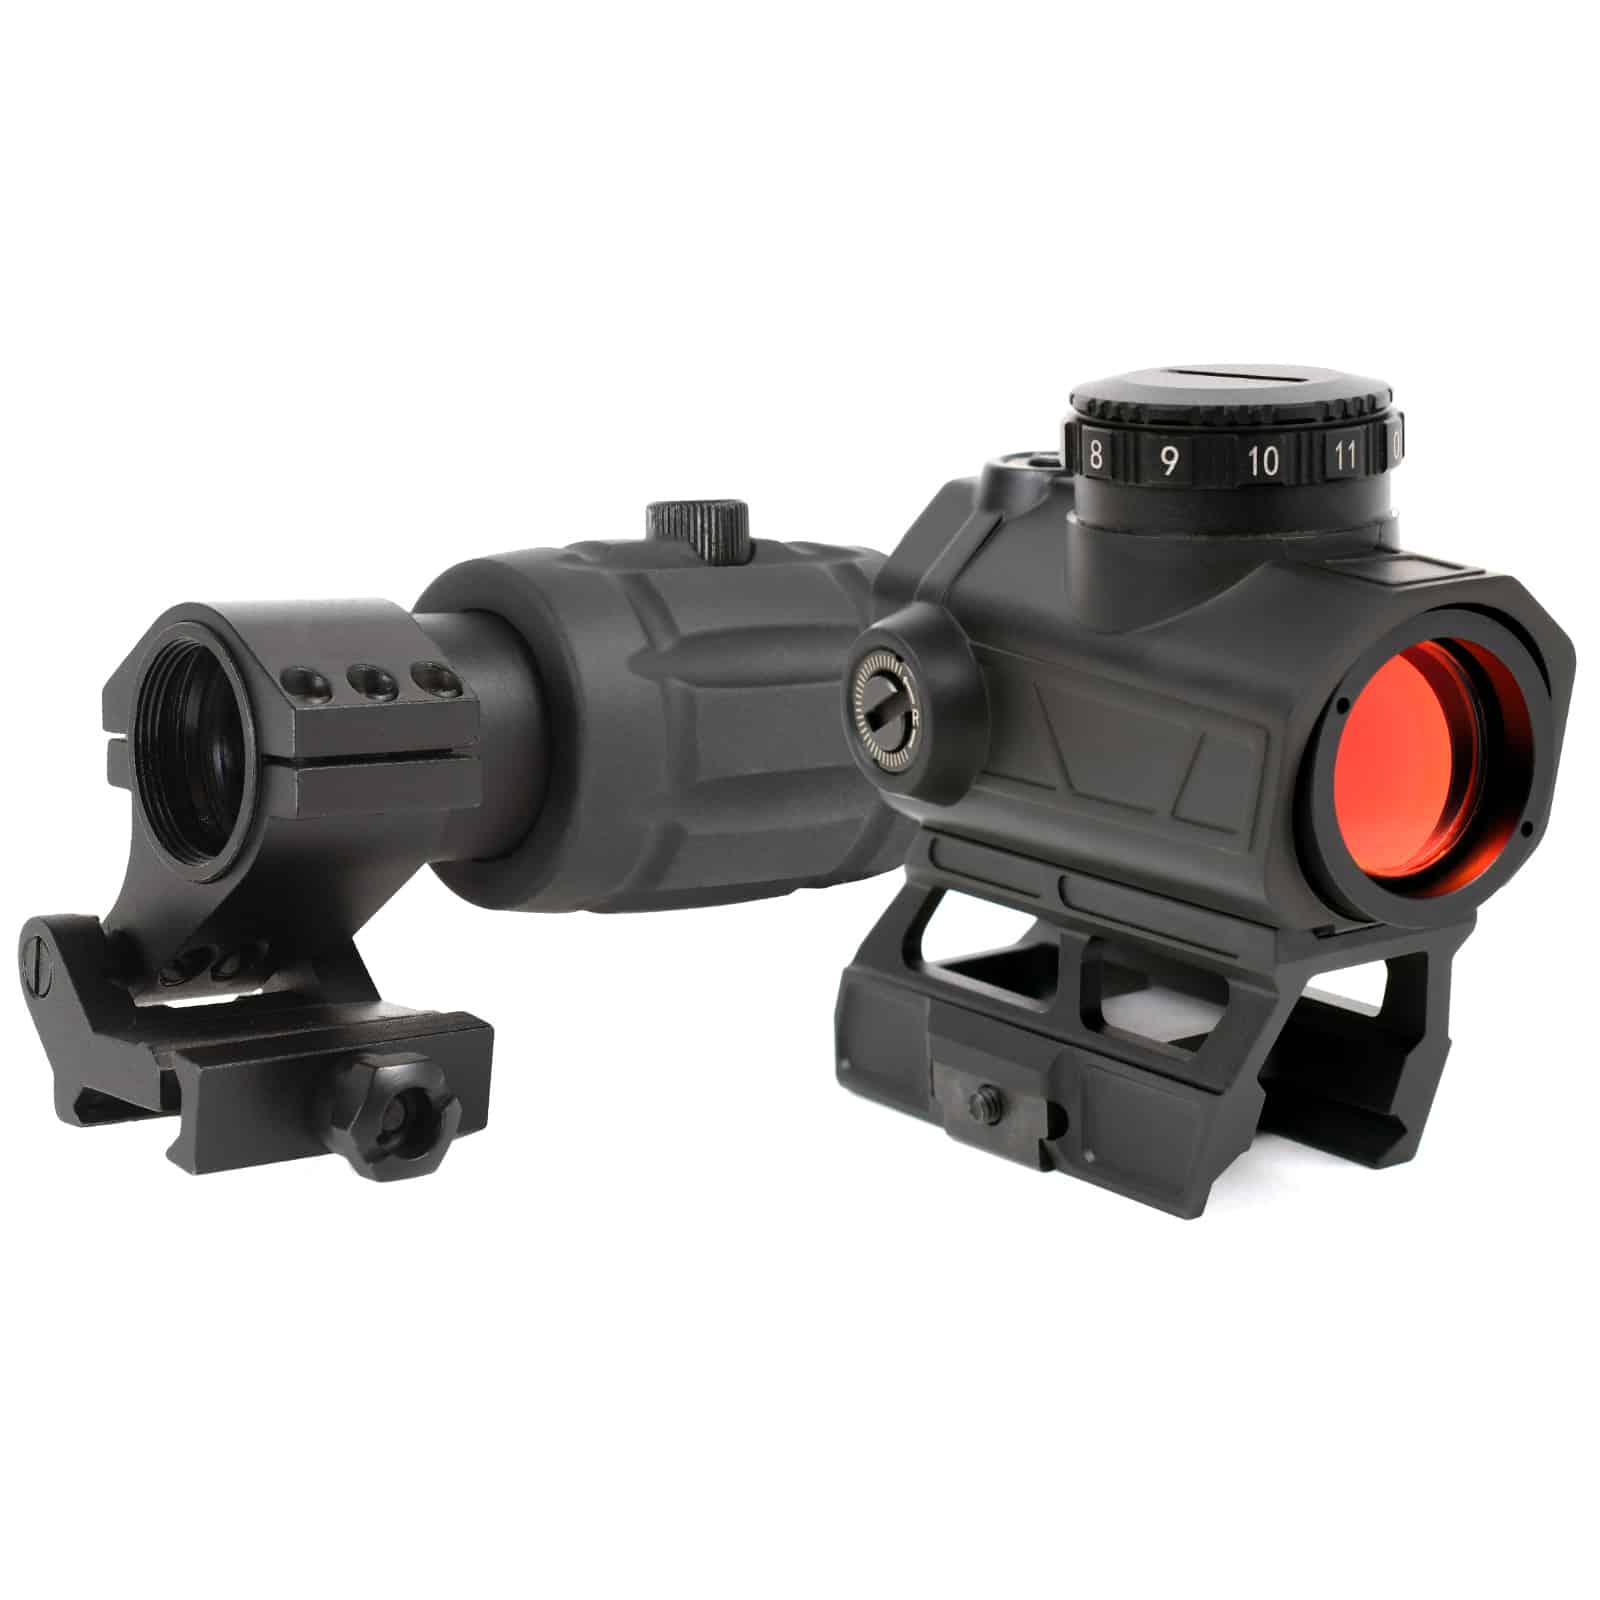 AT3™ ALPHA + RRDM Red Dot Kit - Includes Red Dot Sight & 3x Magnifier